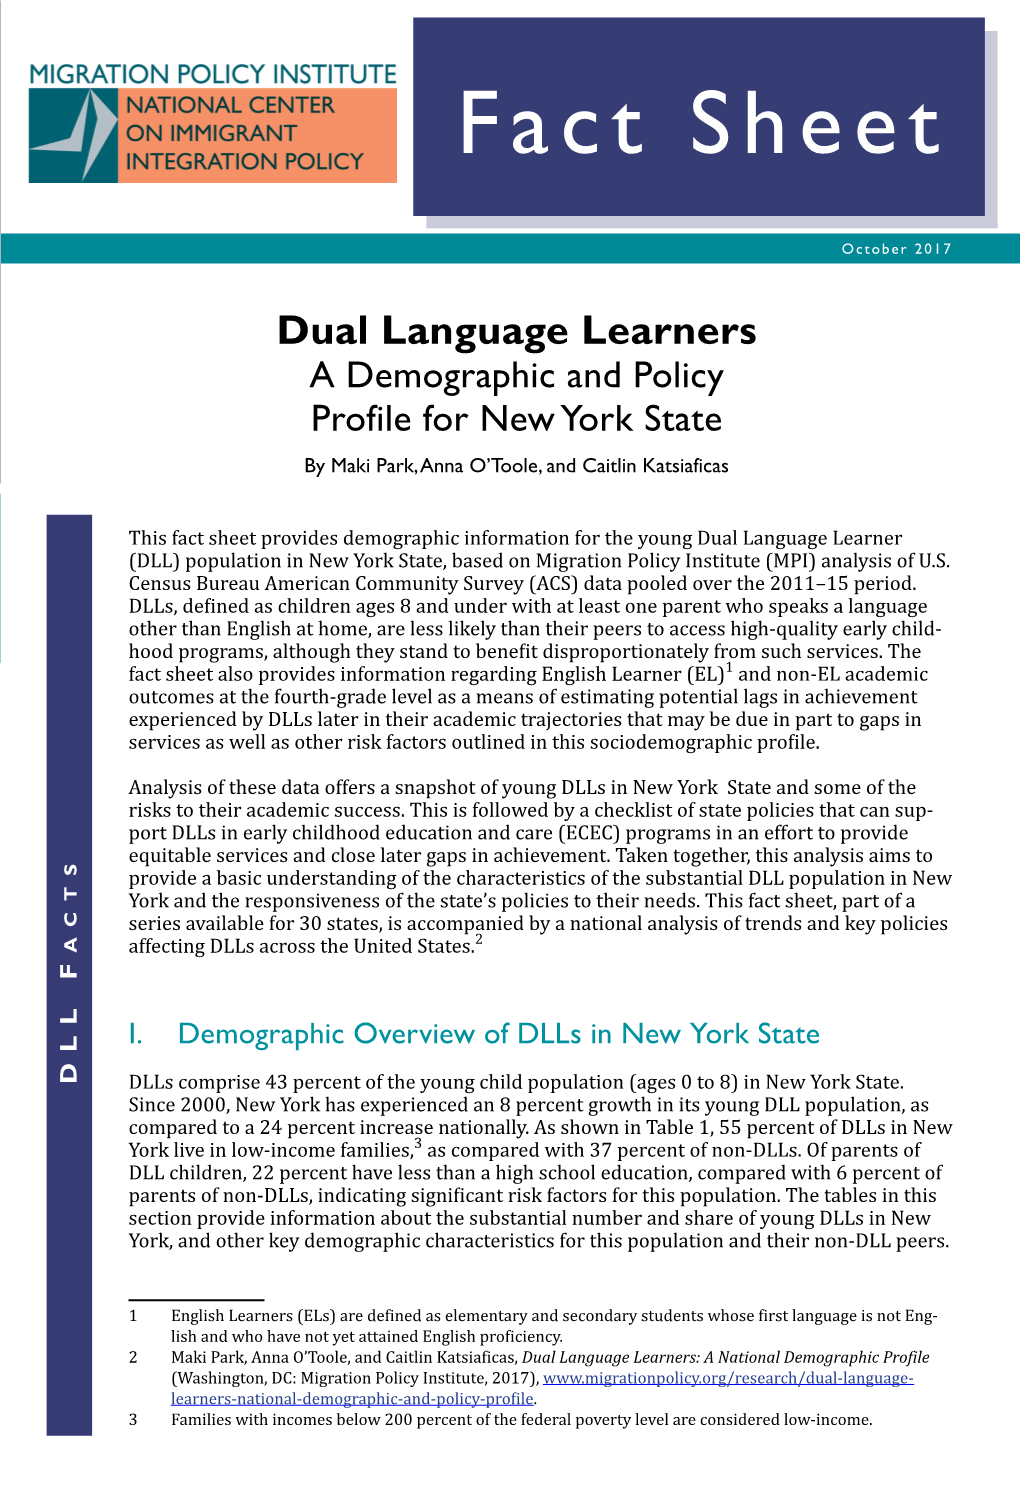 Dual Language Learners a Demographic and Policy Profile for New York State by Maki Park, Anna O’Toole, and Caitlin Katsiaficas